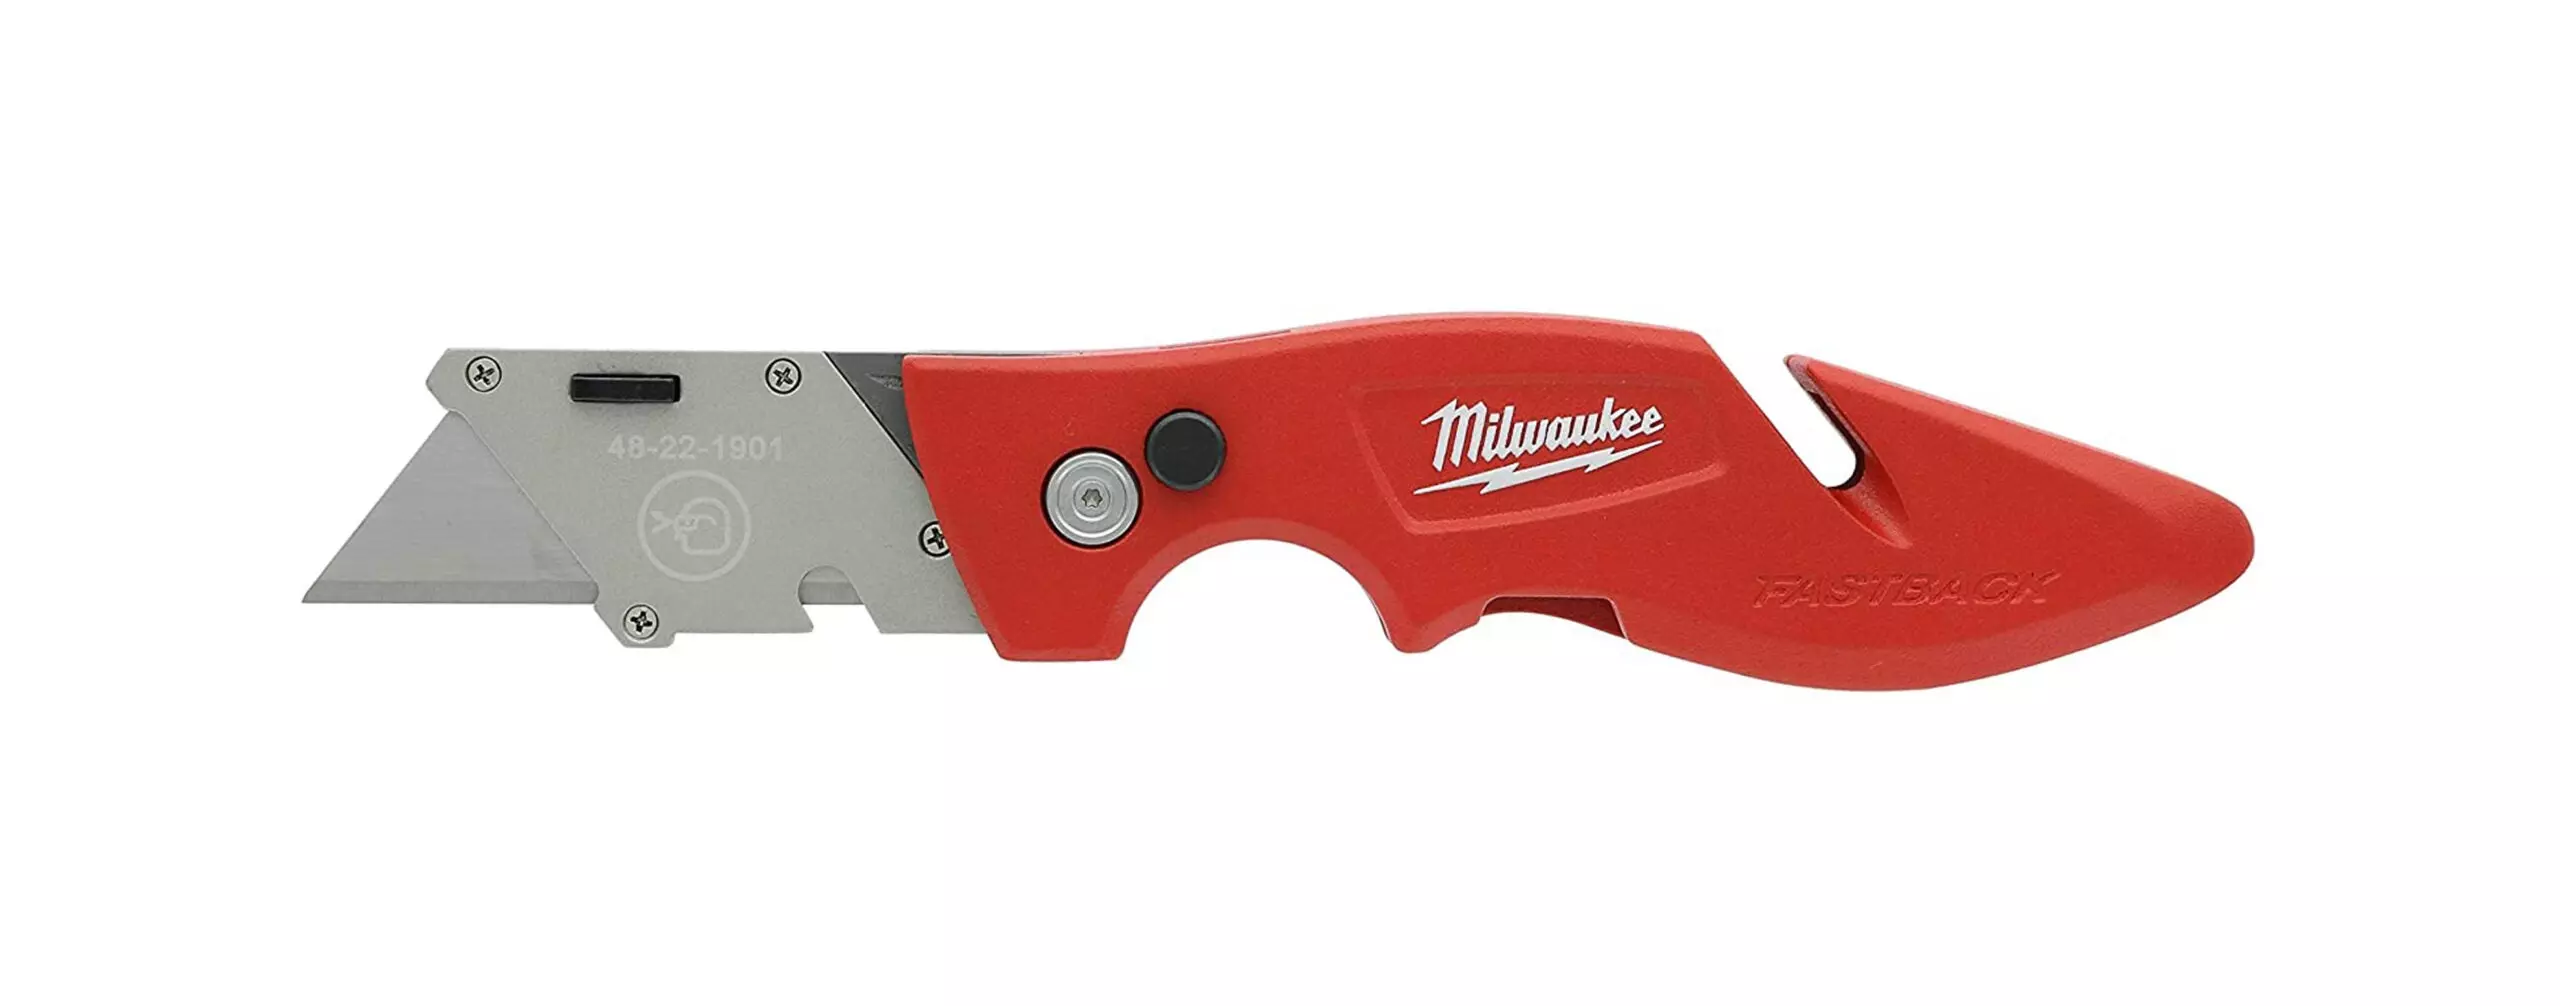 The Best Milwaukee Hand Tools (Review & Buying Guide) in 2022